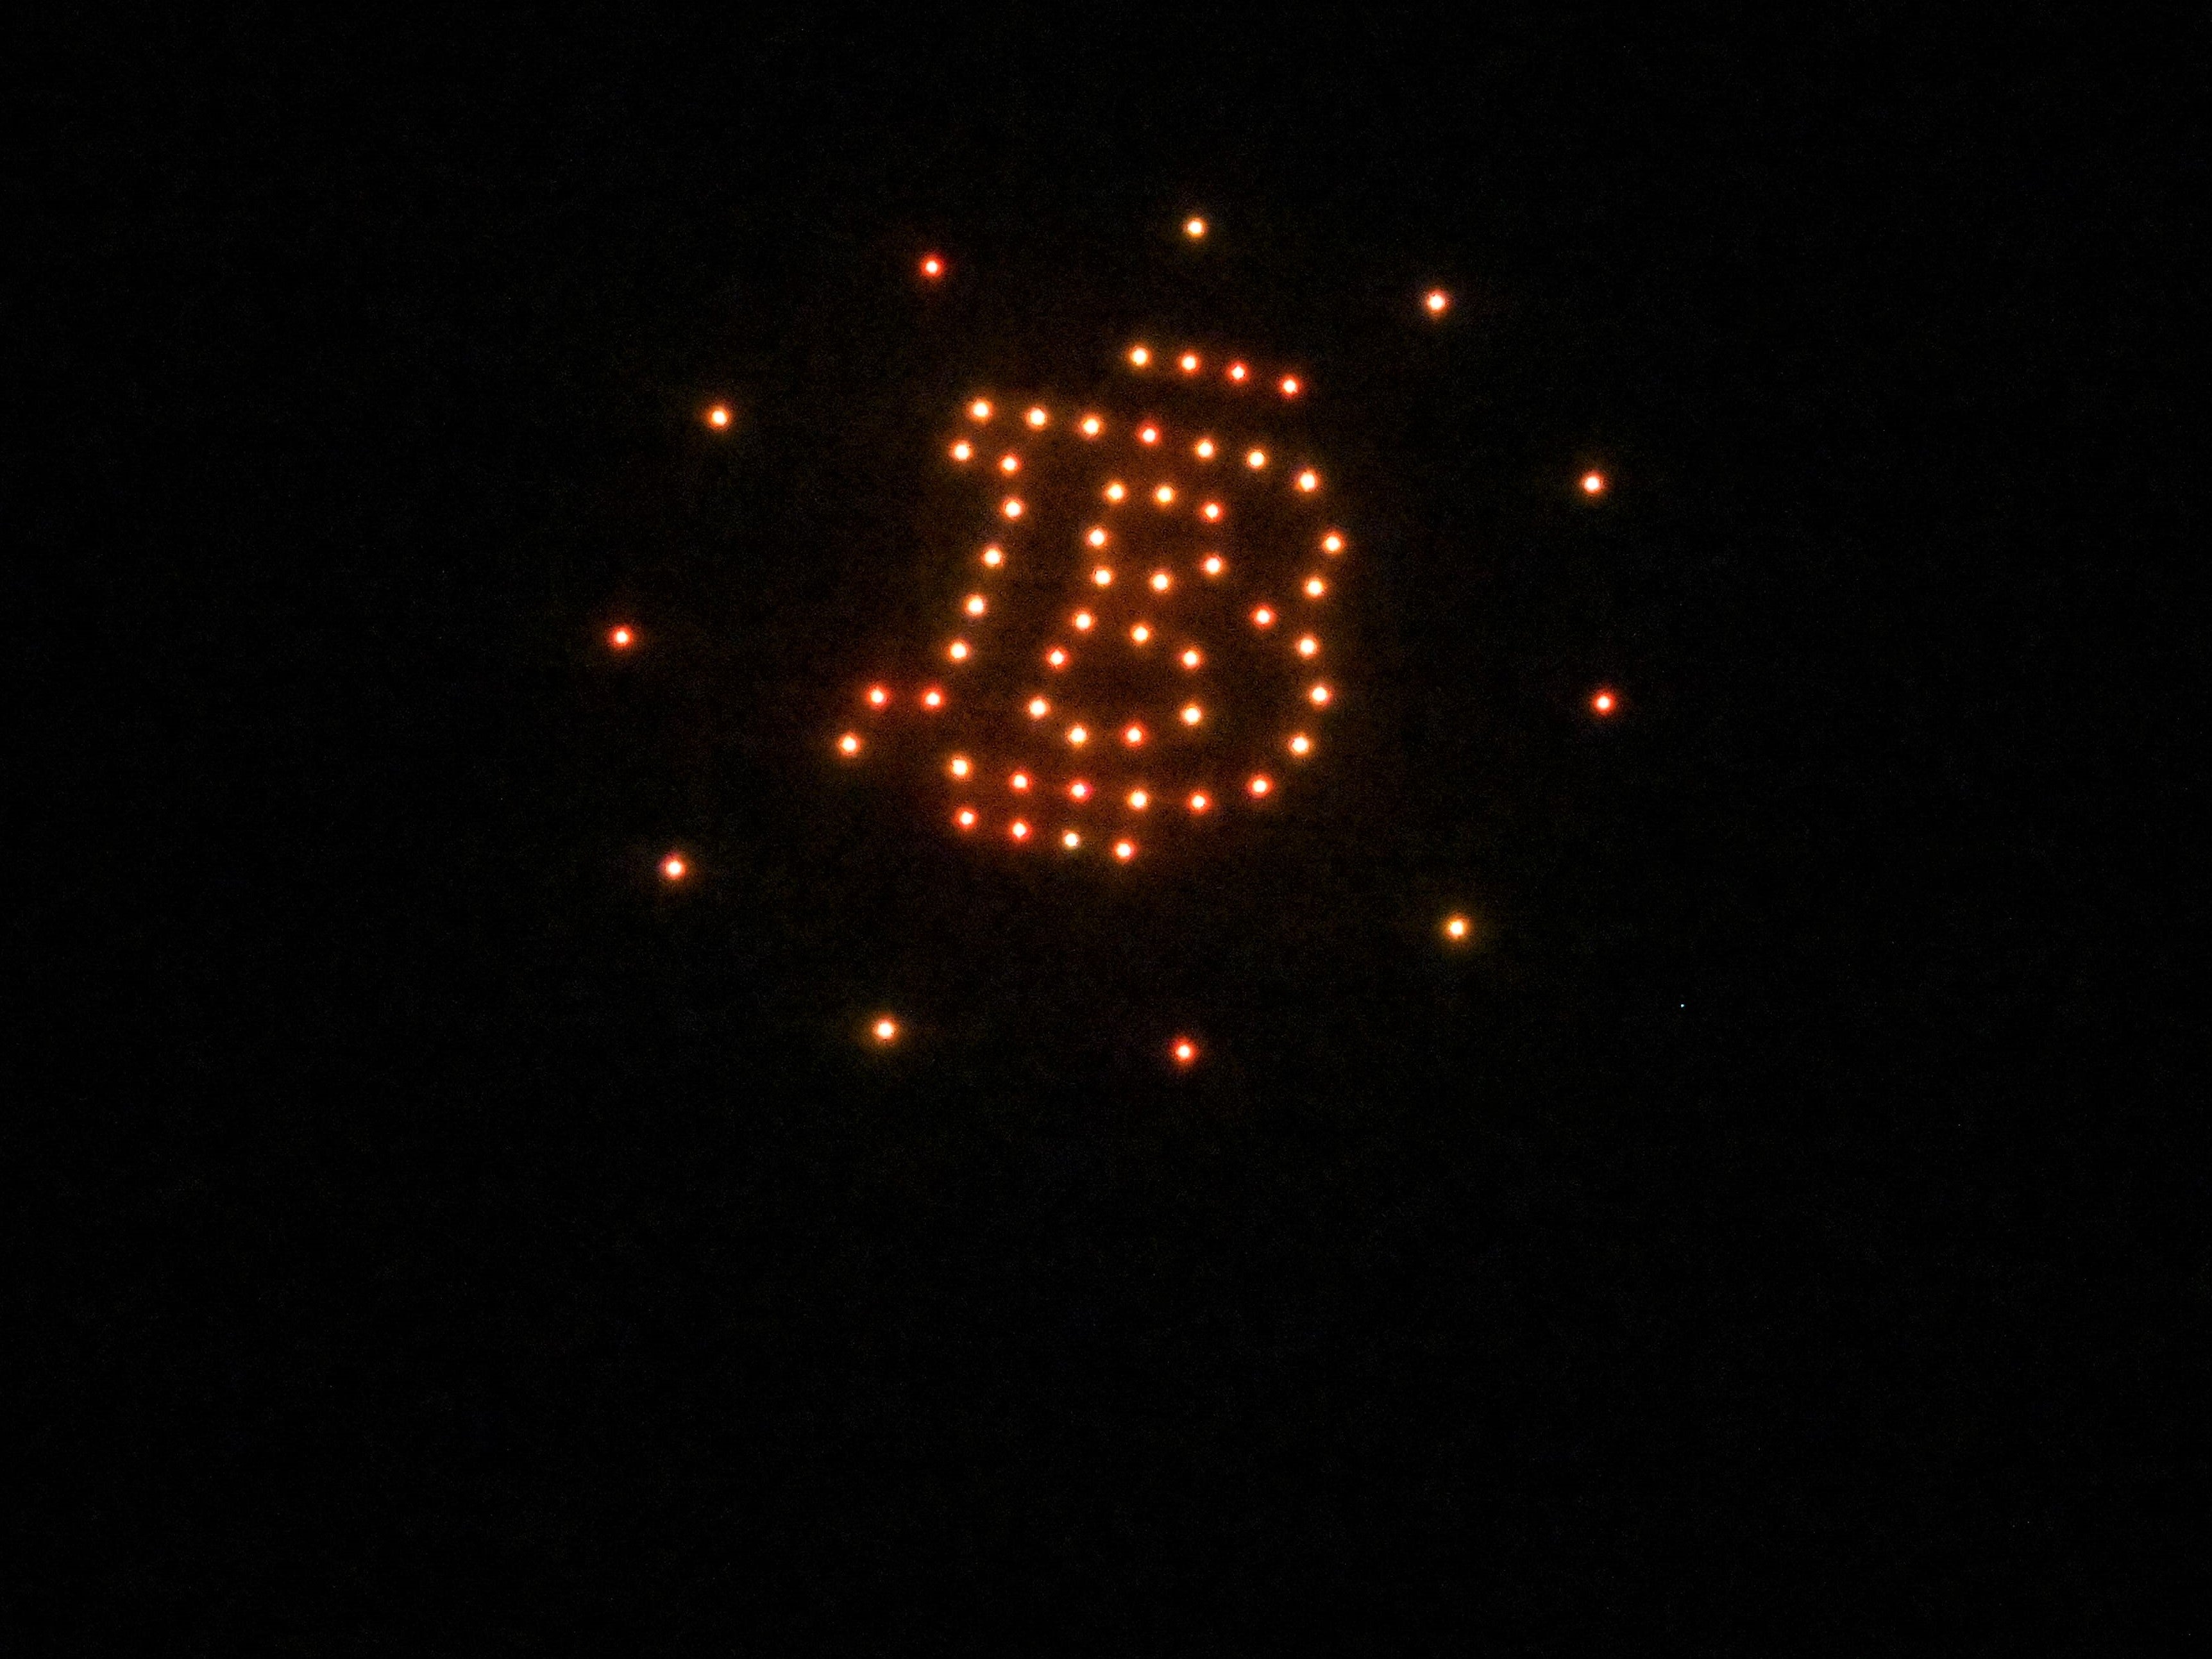 Illuminated drones form figures inspired by the bitcoin logo at a reception hosted by American cryptocurrency developer and billionaire Brock Pierce on the first day of bitcoin’s implementation as a currency in El Salvador, in El Sunzal Beach on 7 September, 2021